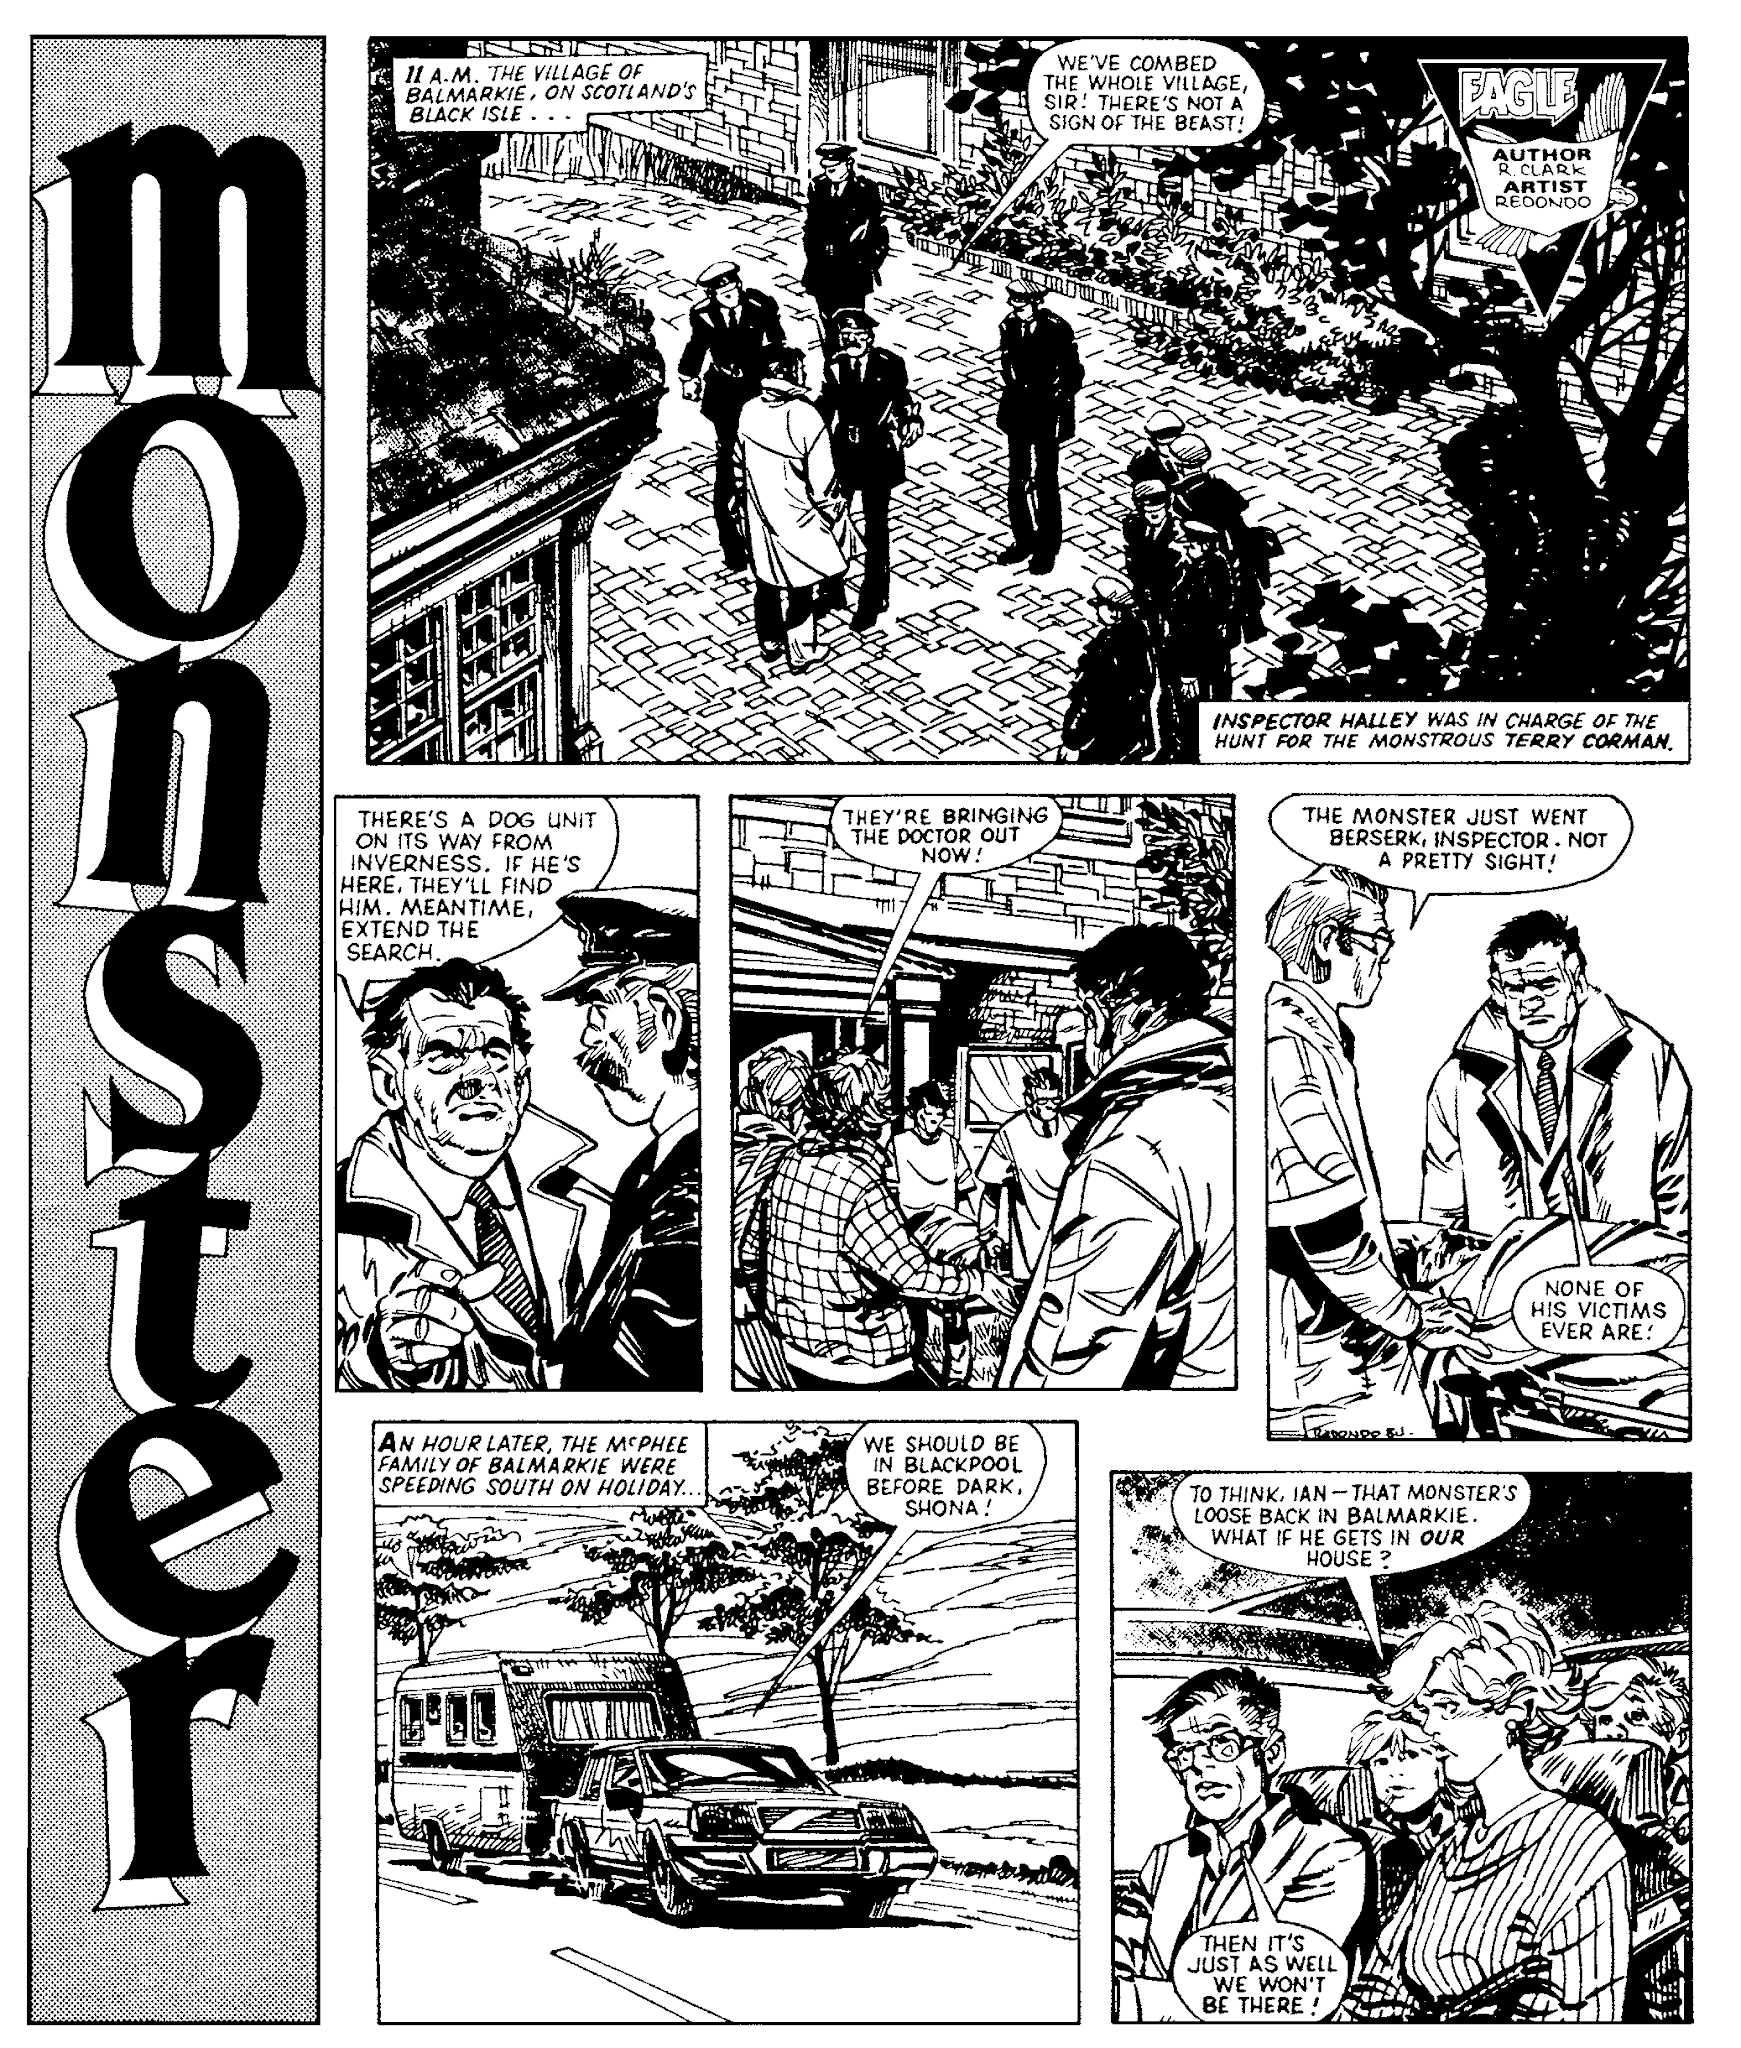 Read online Monster comic -  Issue # TPB (Part 1) - 89